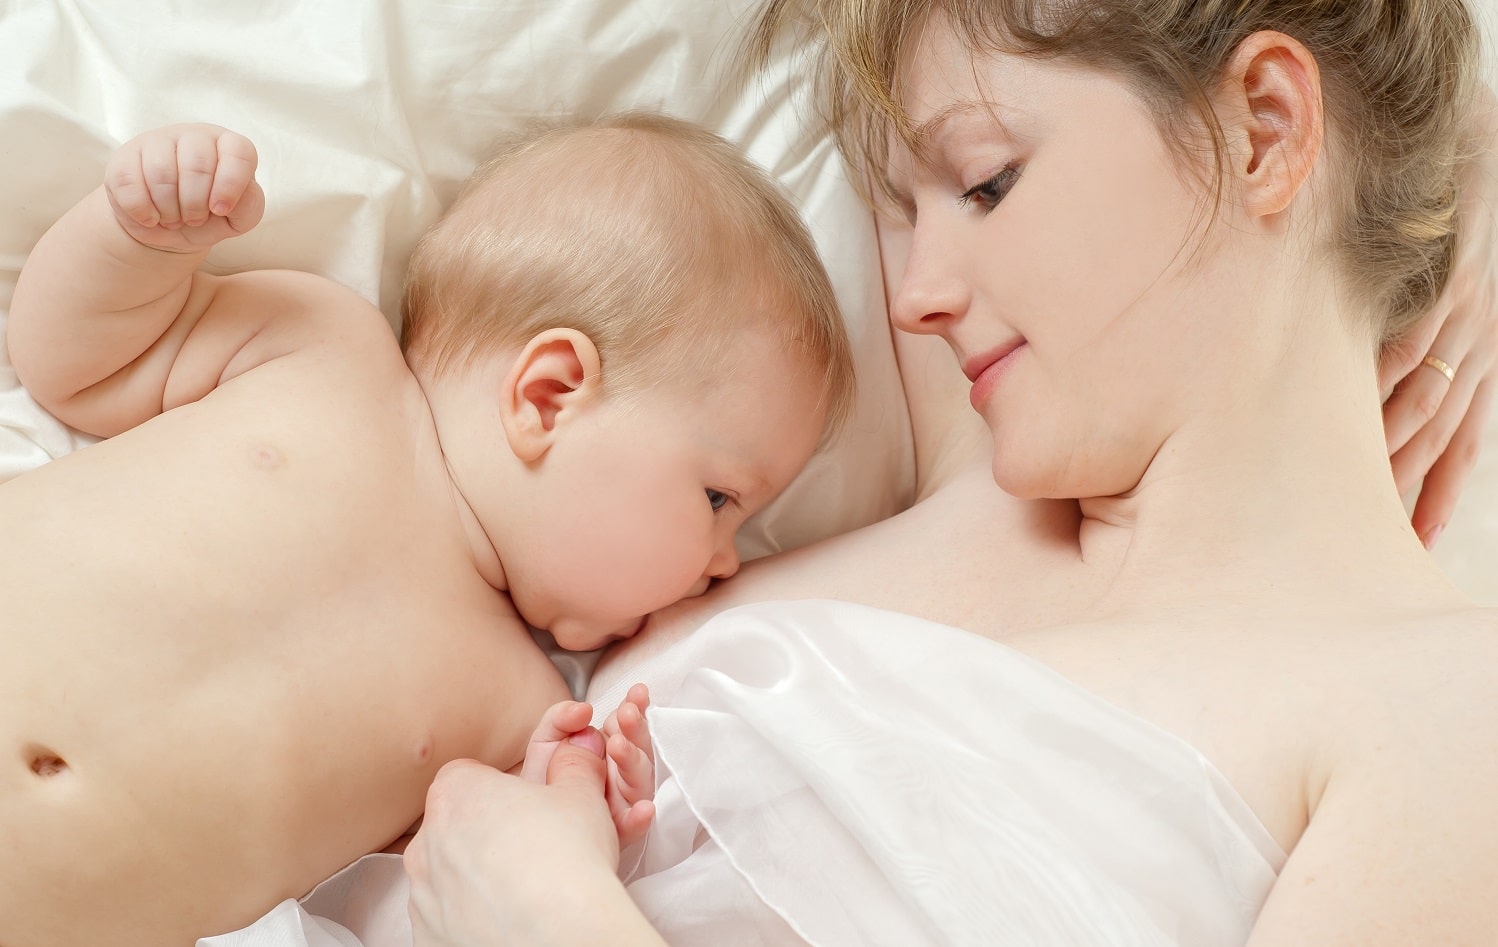 advantages of breastfeeding for your baby - 11 Steps To Successful Breastfeeding